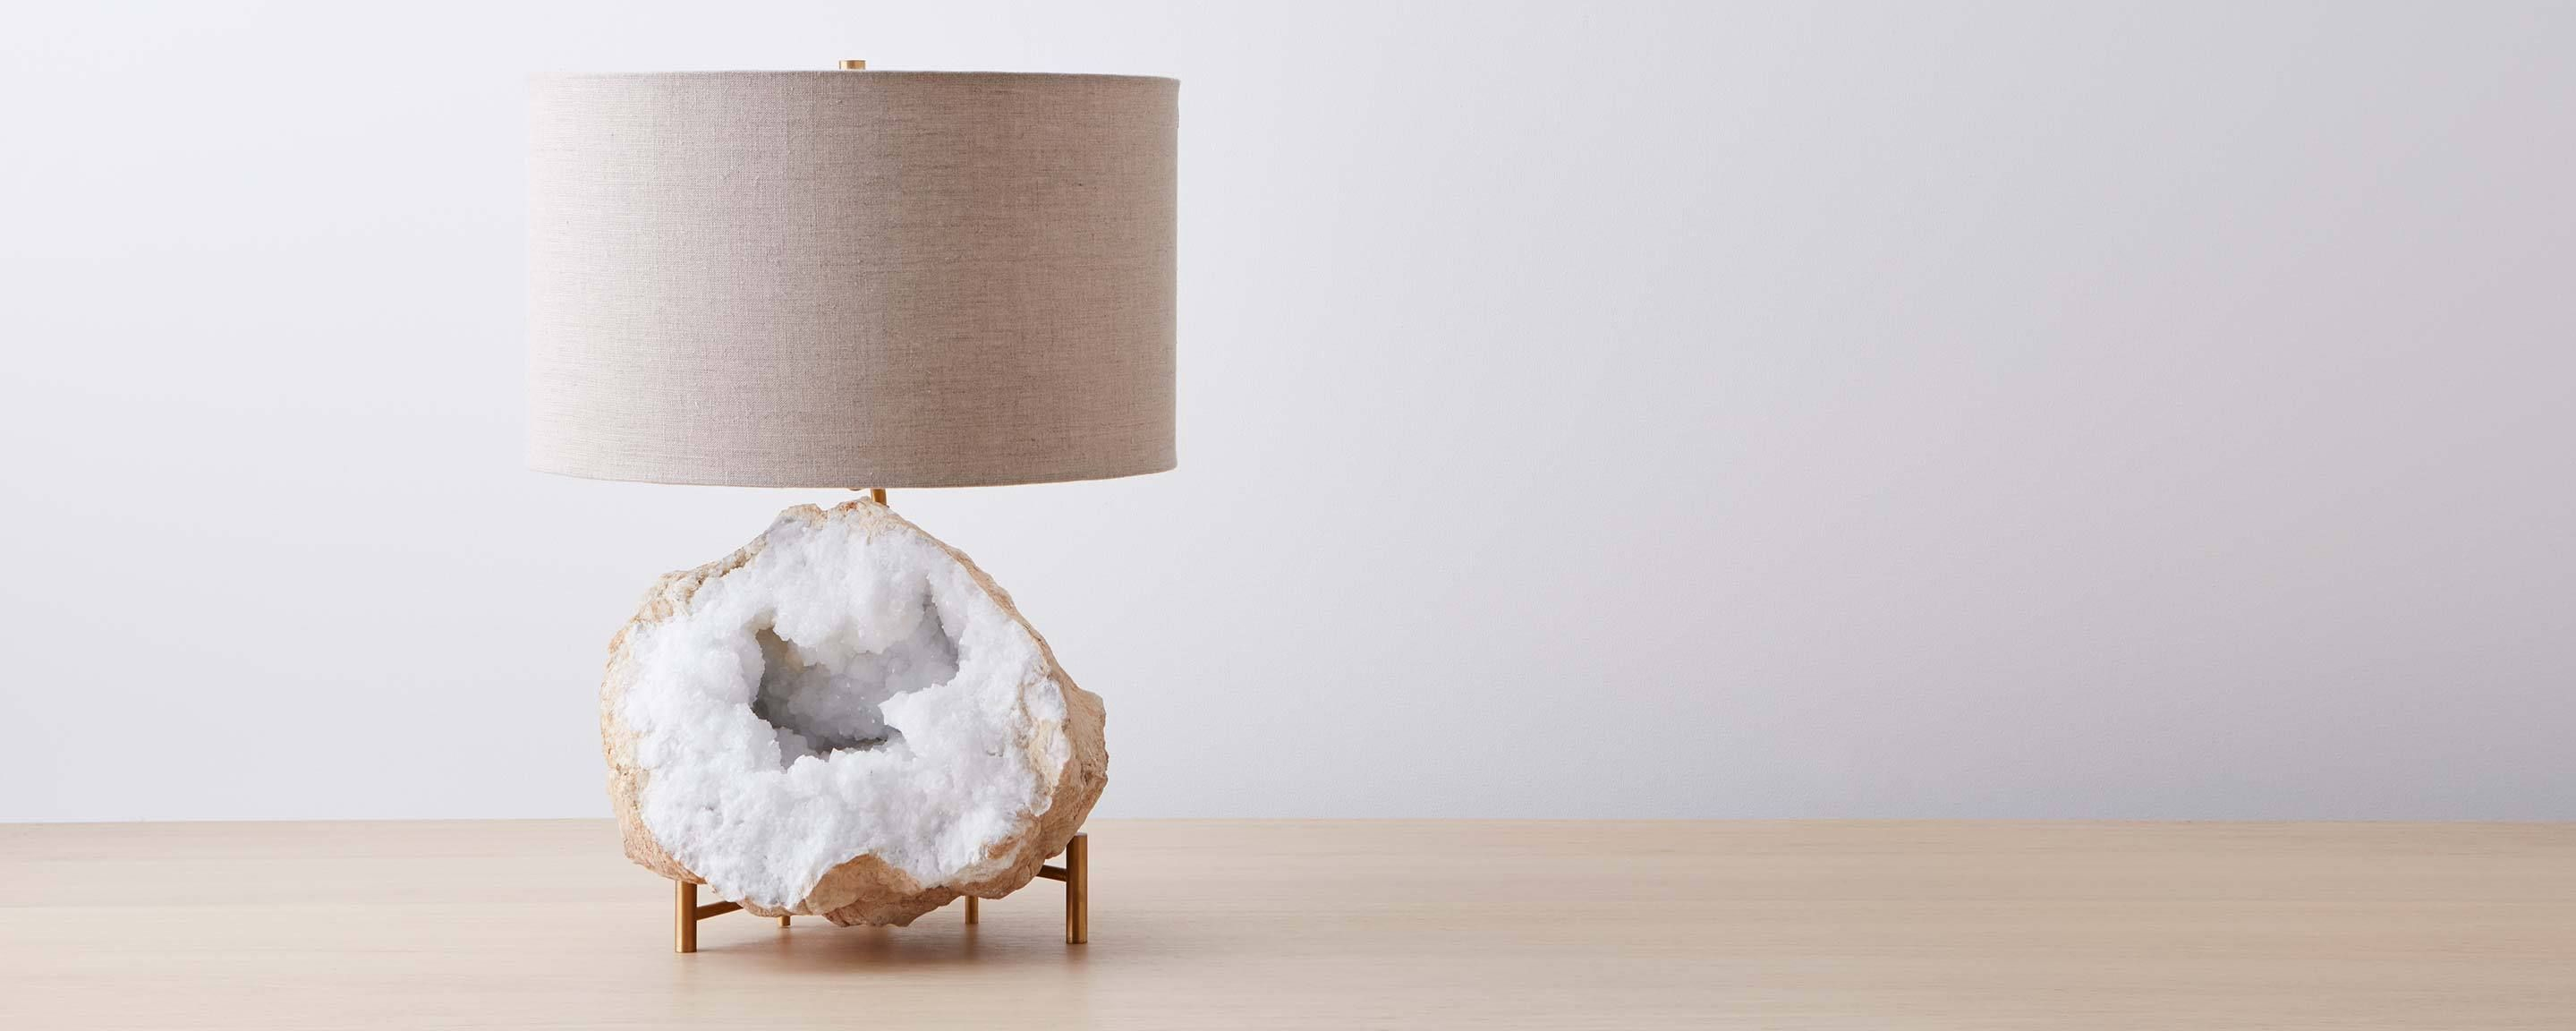 Mineral Lamp With Crystal Geode Table Lamp Table Lamp within sizing 2879 X 1152